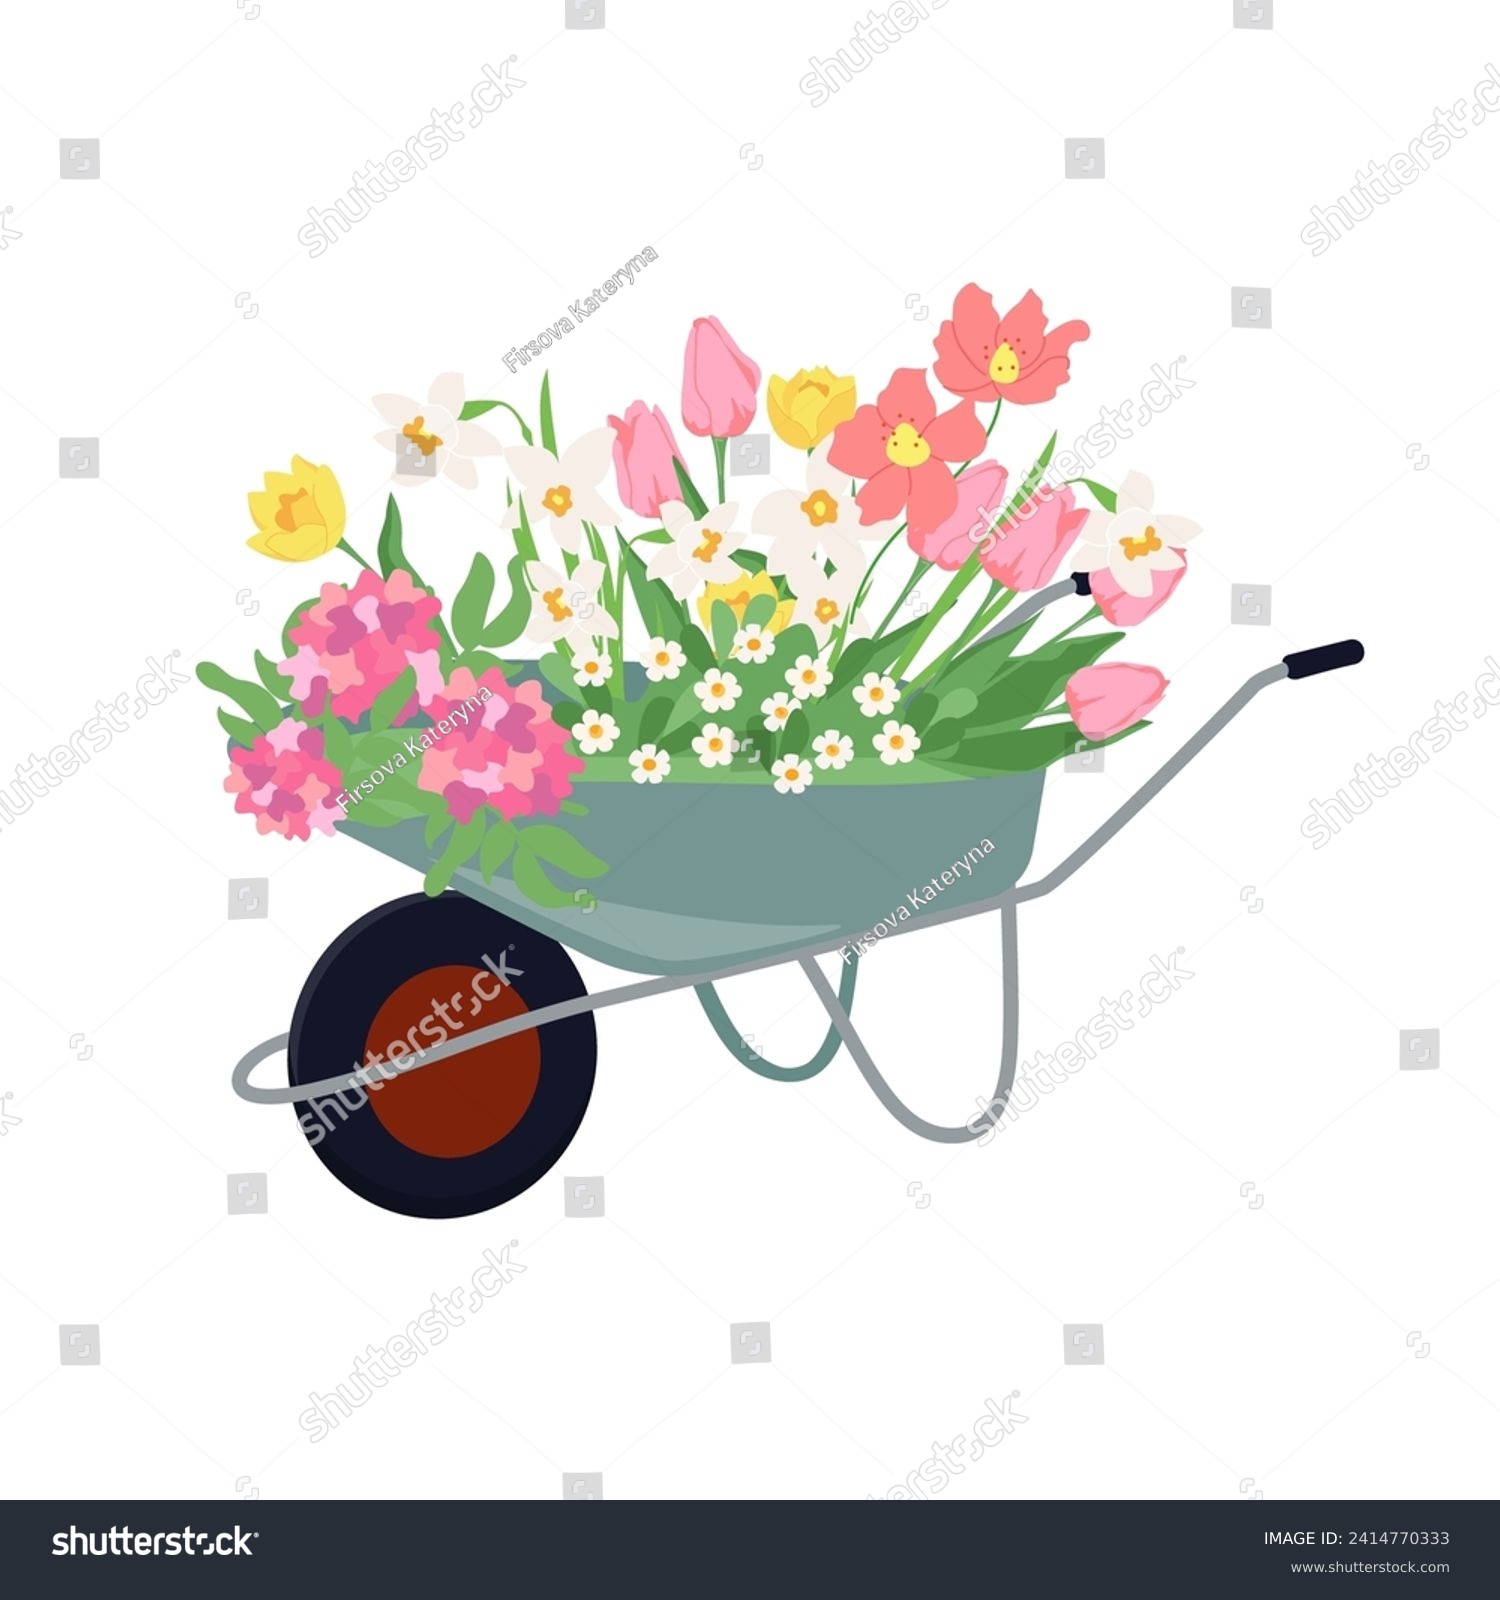 Flower garden cart with early spring flowers. Floral design elements for mother's day, Valentine's Day, birthday. Vector illustration wheelbarrow flat style isolated on white background. #2414770333